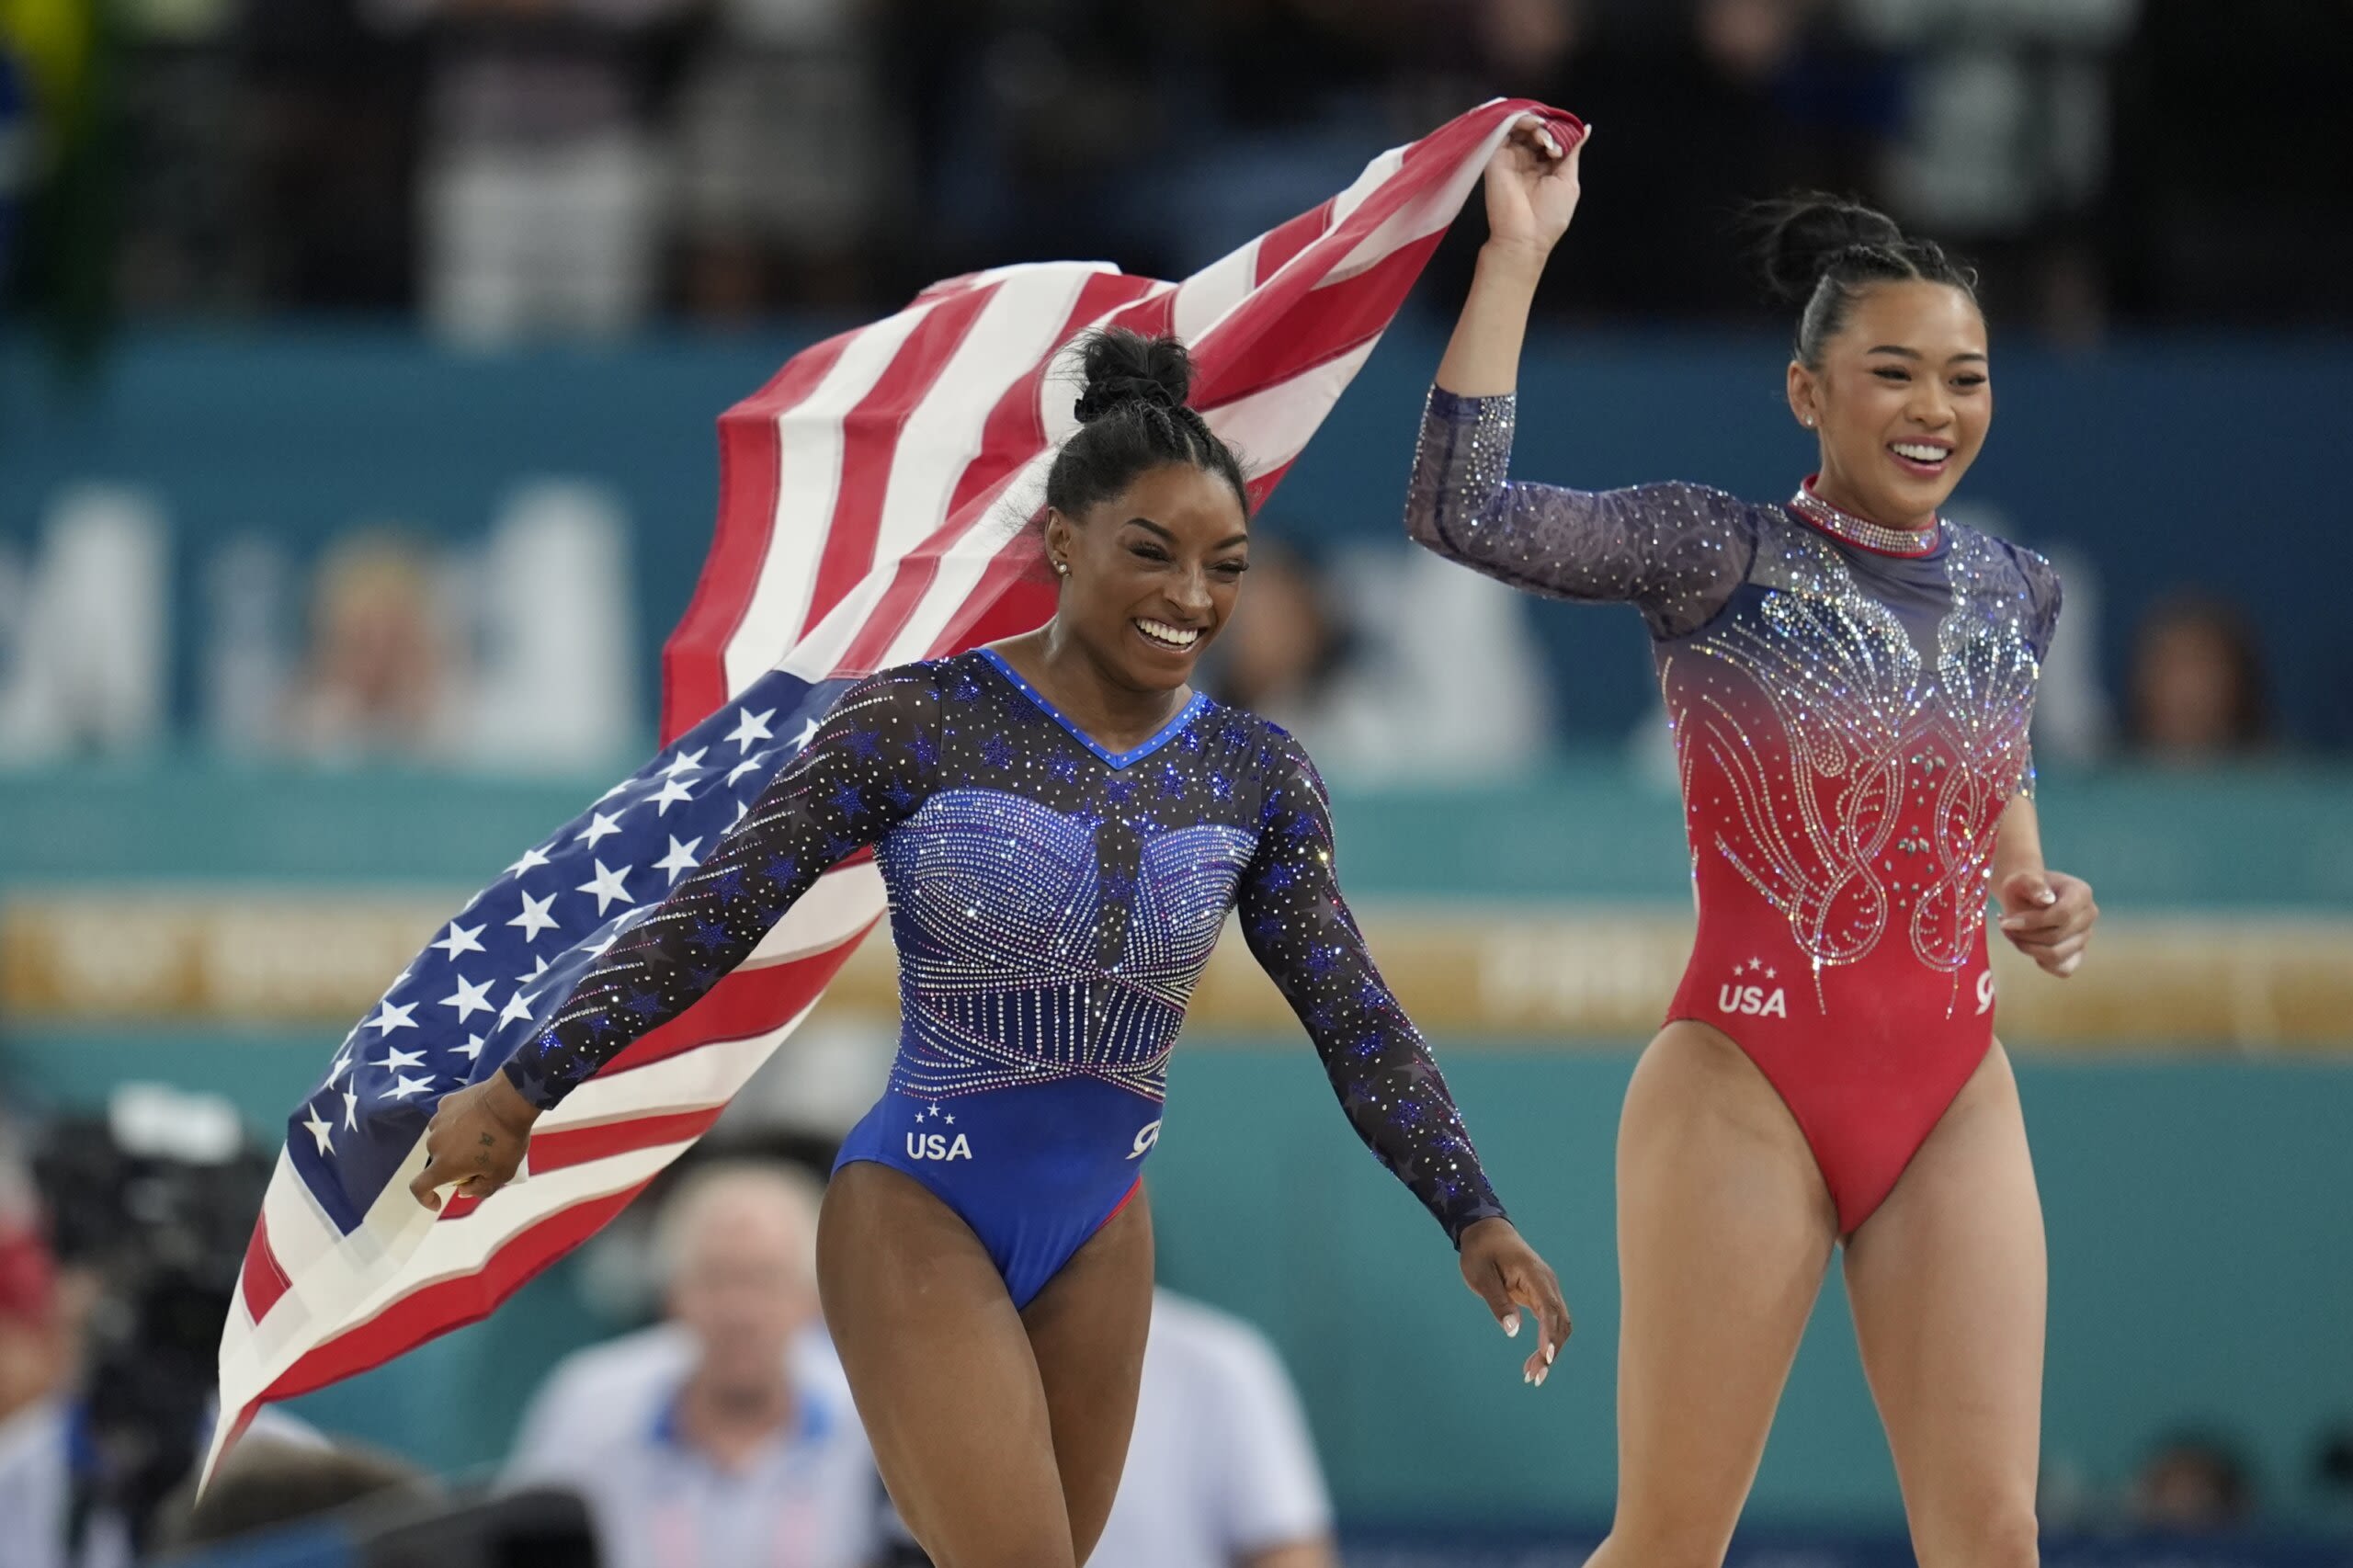 Simone Biles edges Brazil’s Rebeca Andrade for her second Olympic all-around gymnastics title - WTOP News